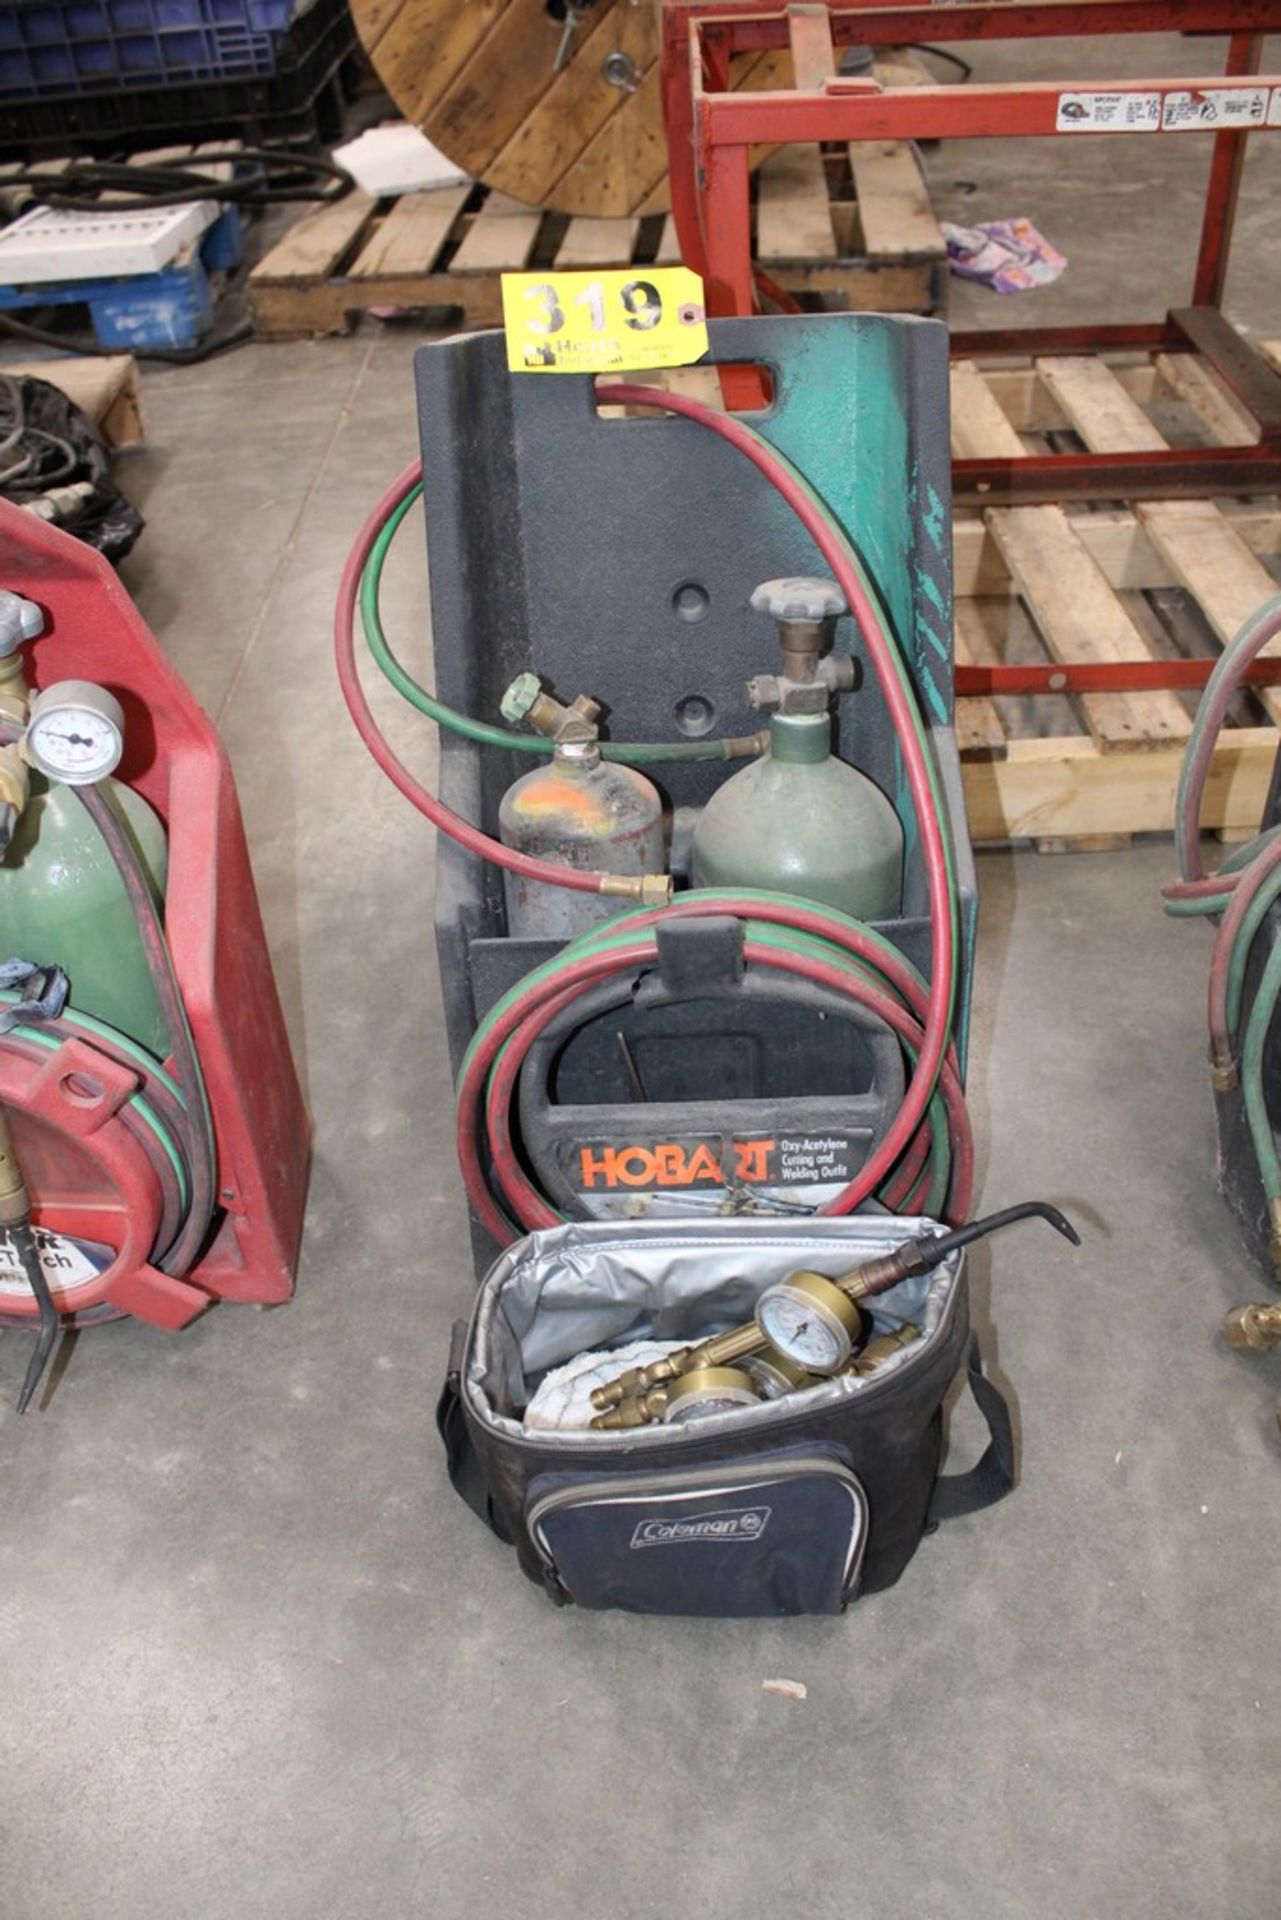 HOBART CUTTING/WELDING OUTFIT WITH TANKS, GAGES, HOSE AND TORCH